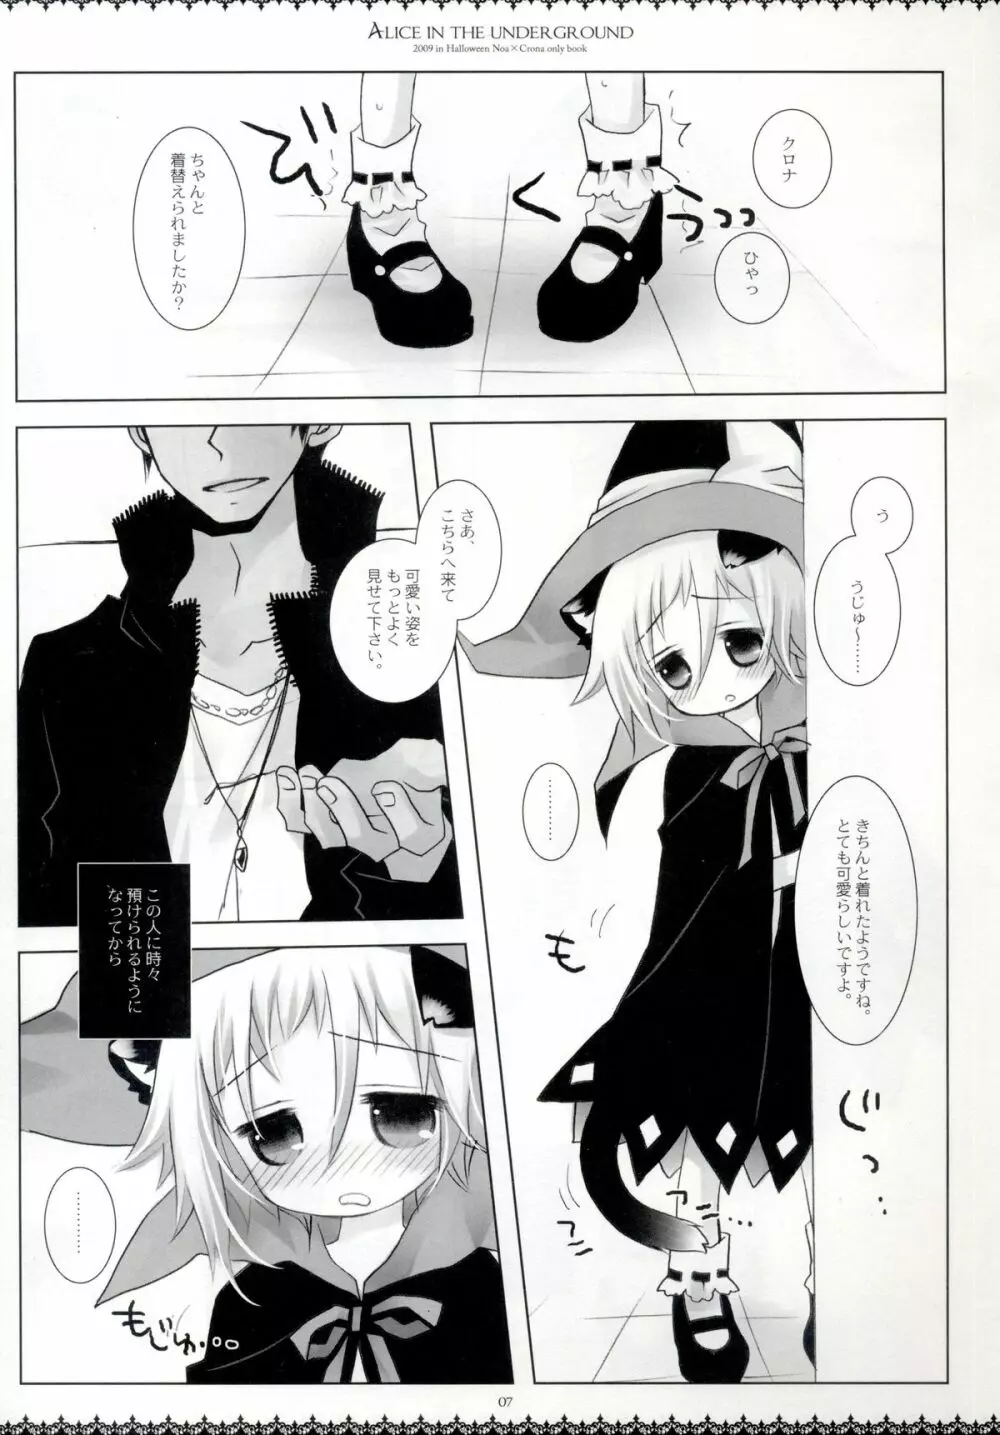 Alice in the underground Page.6